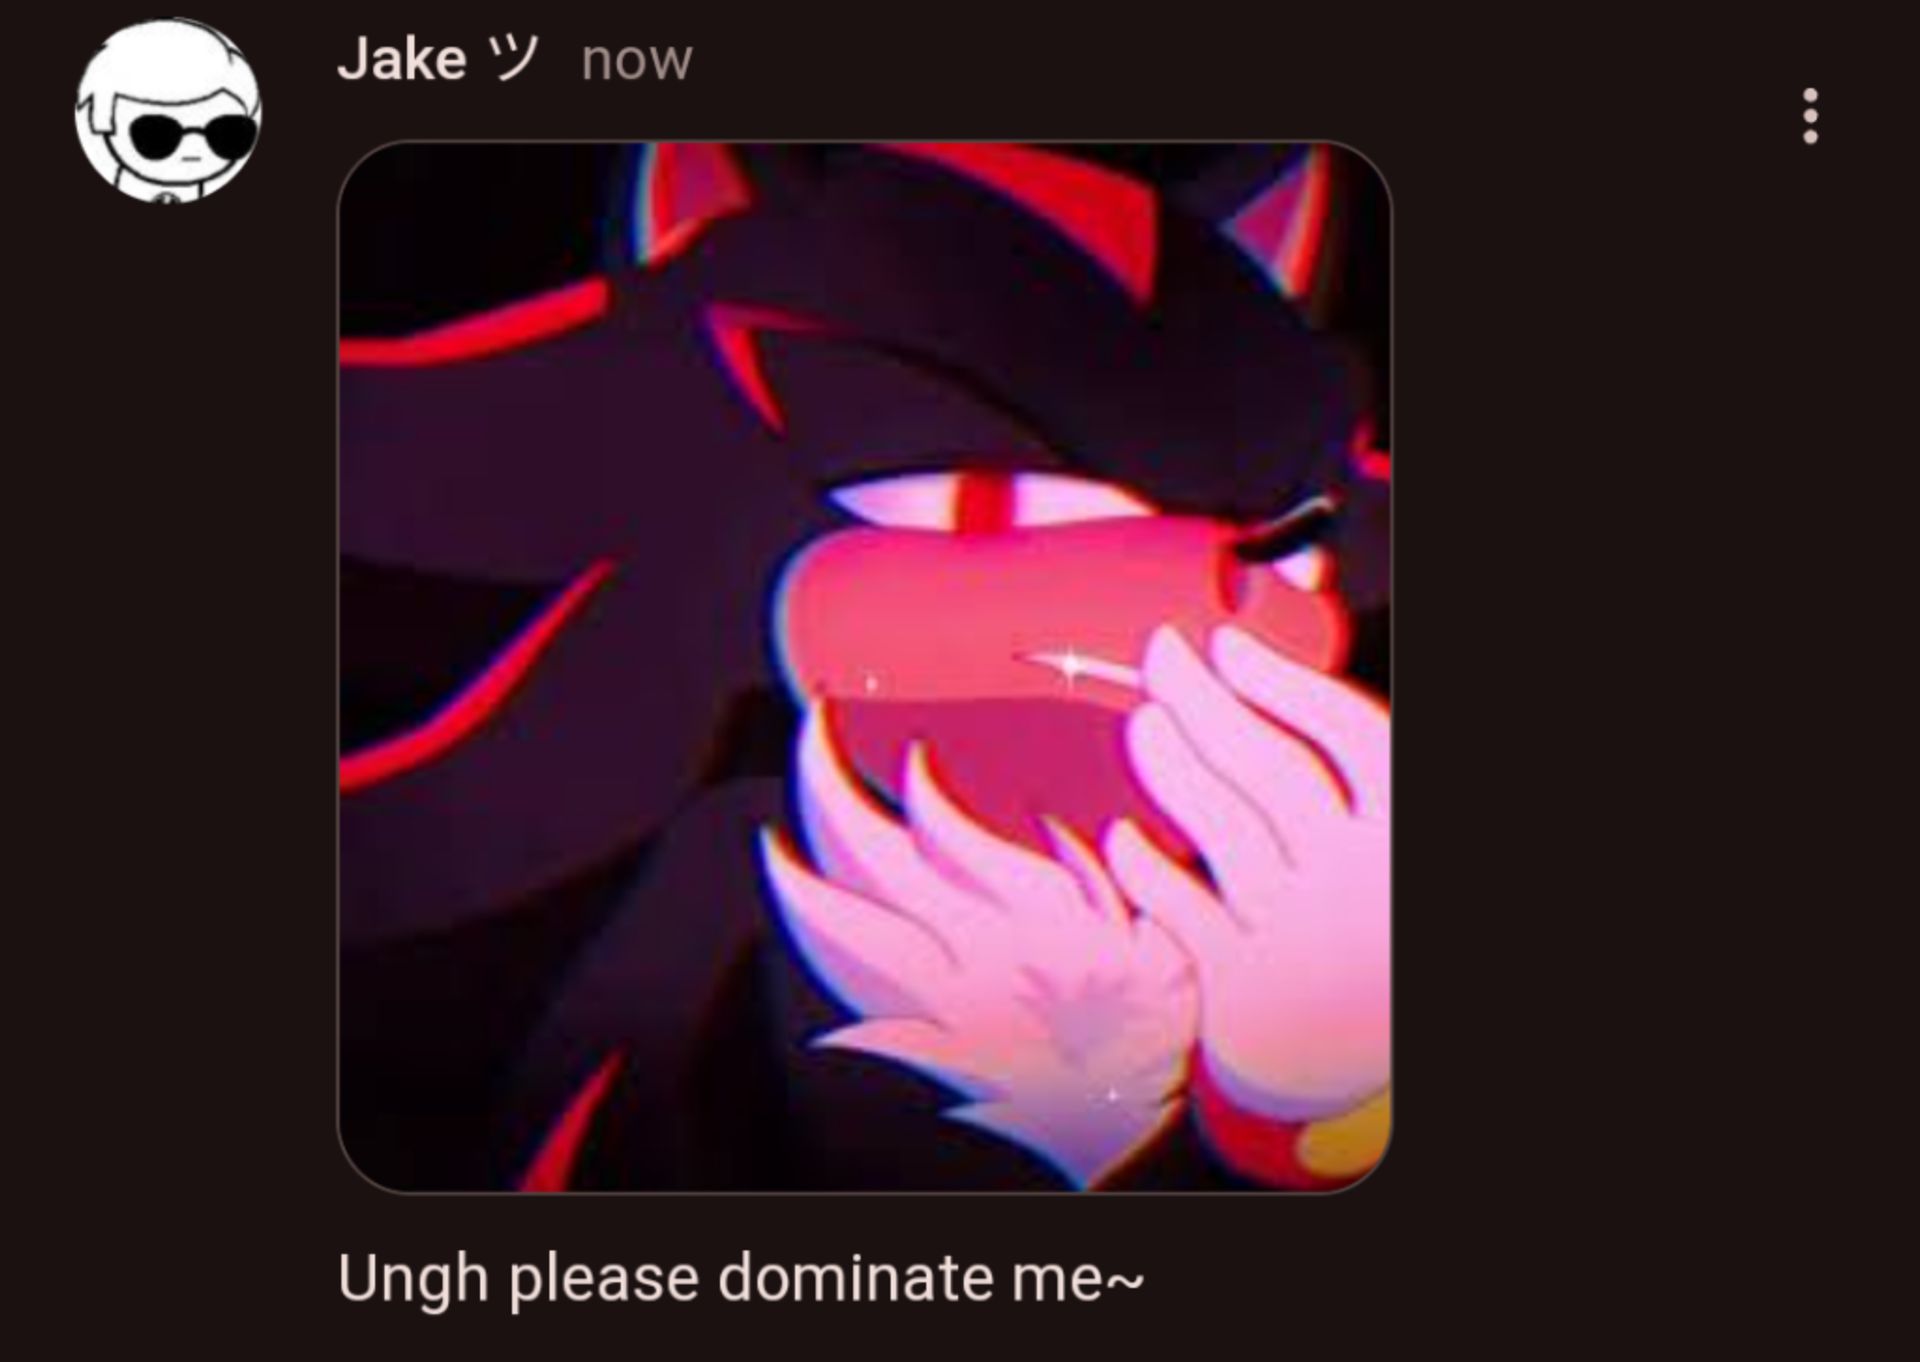 Jake W now
⠀
Ungh please dominate me~